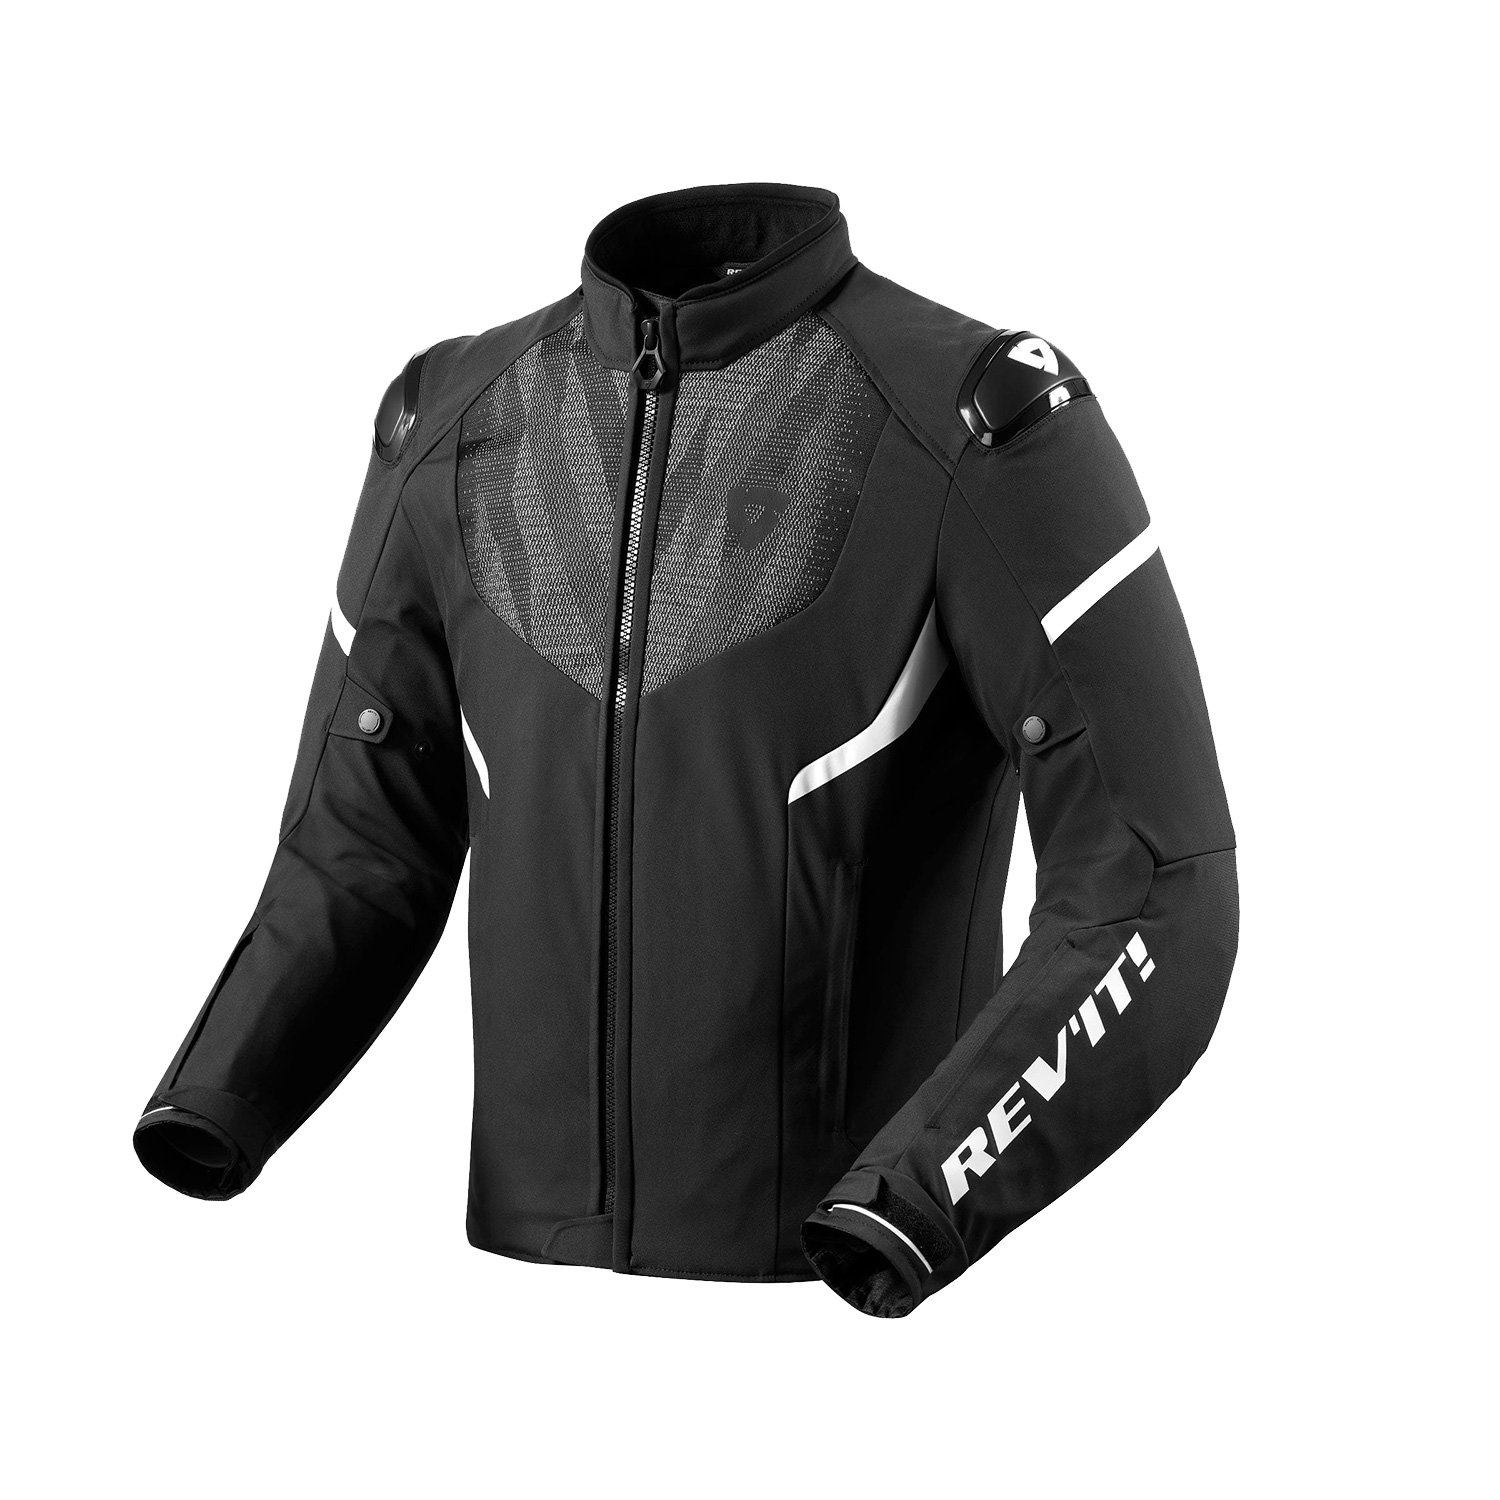 Image of REV'IT! Hyperspeed 2 H2O Jacket Black White Size L ID 8700001367424